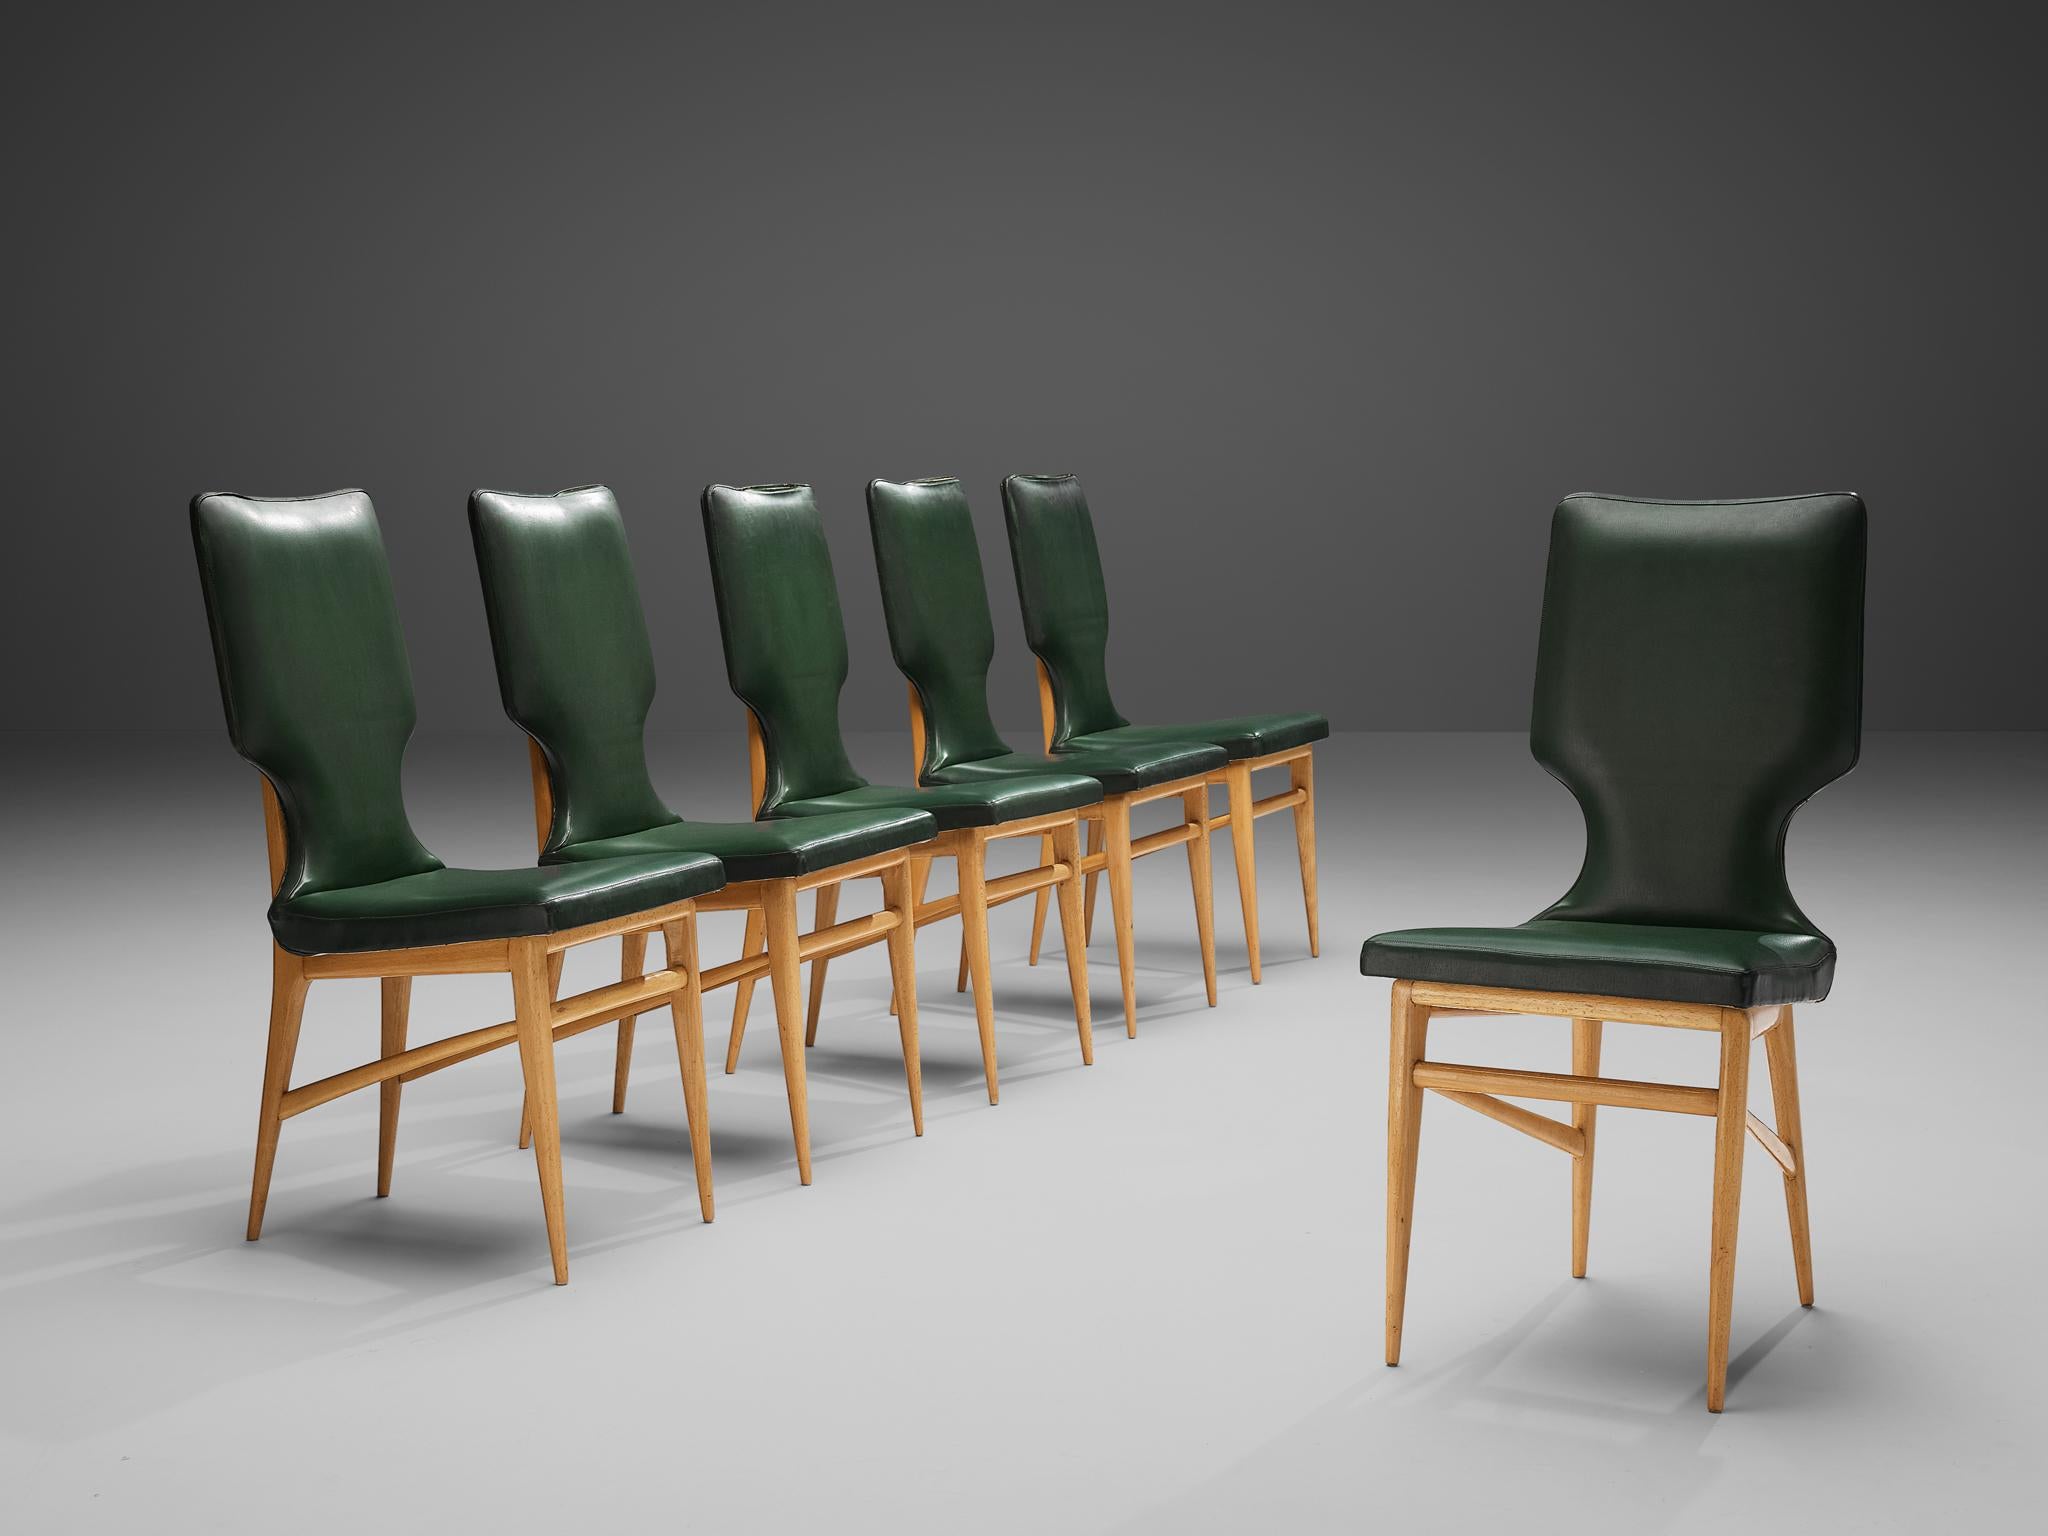 Set of six dining chairs, beech, green leatherette, Italy, 1950s
 
The Italian design of this set of six dining chairs emphasizes the contrast between its two materials: A distinct shaped frame in bright beech wood and a green colored geometric